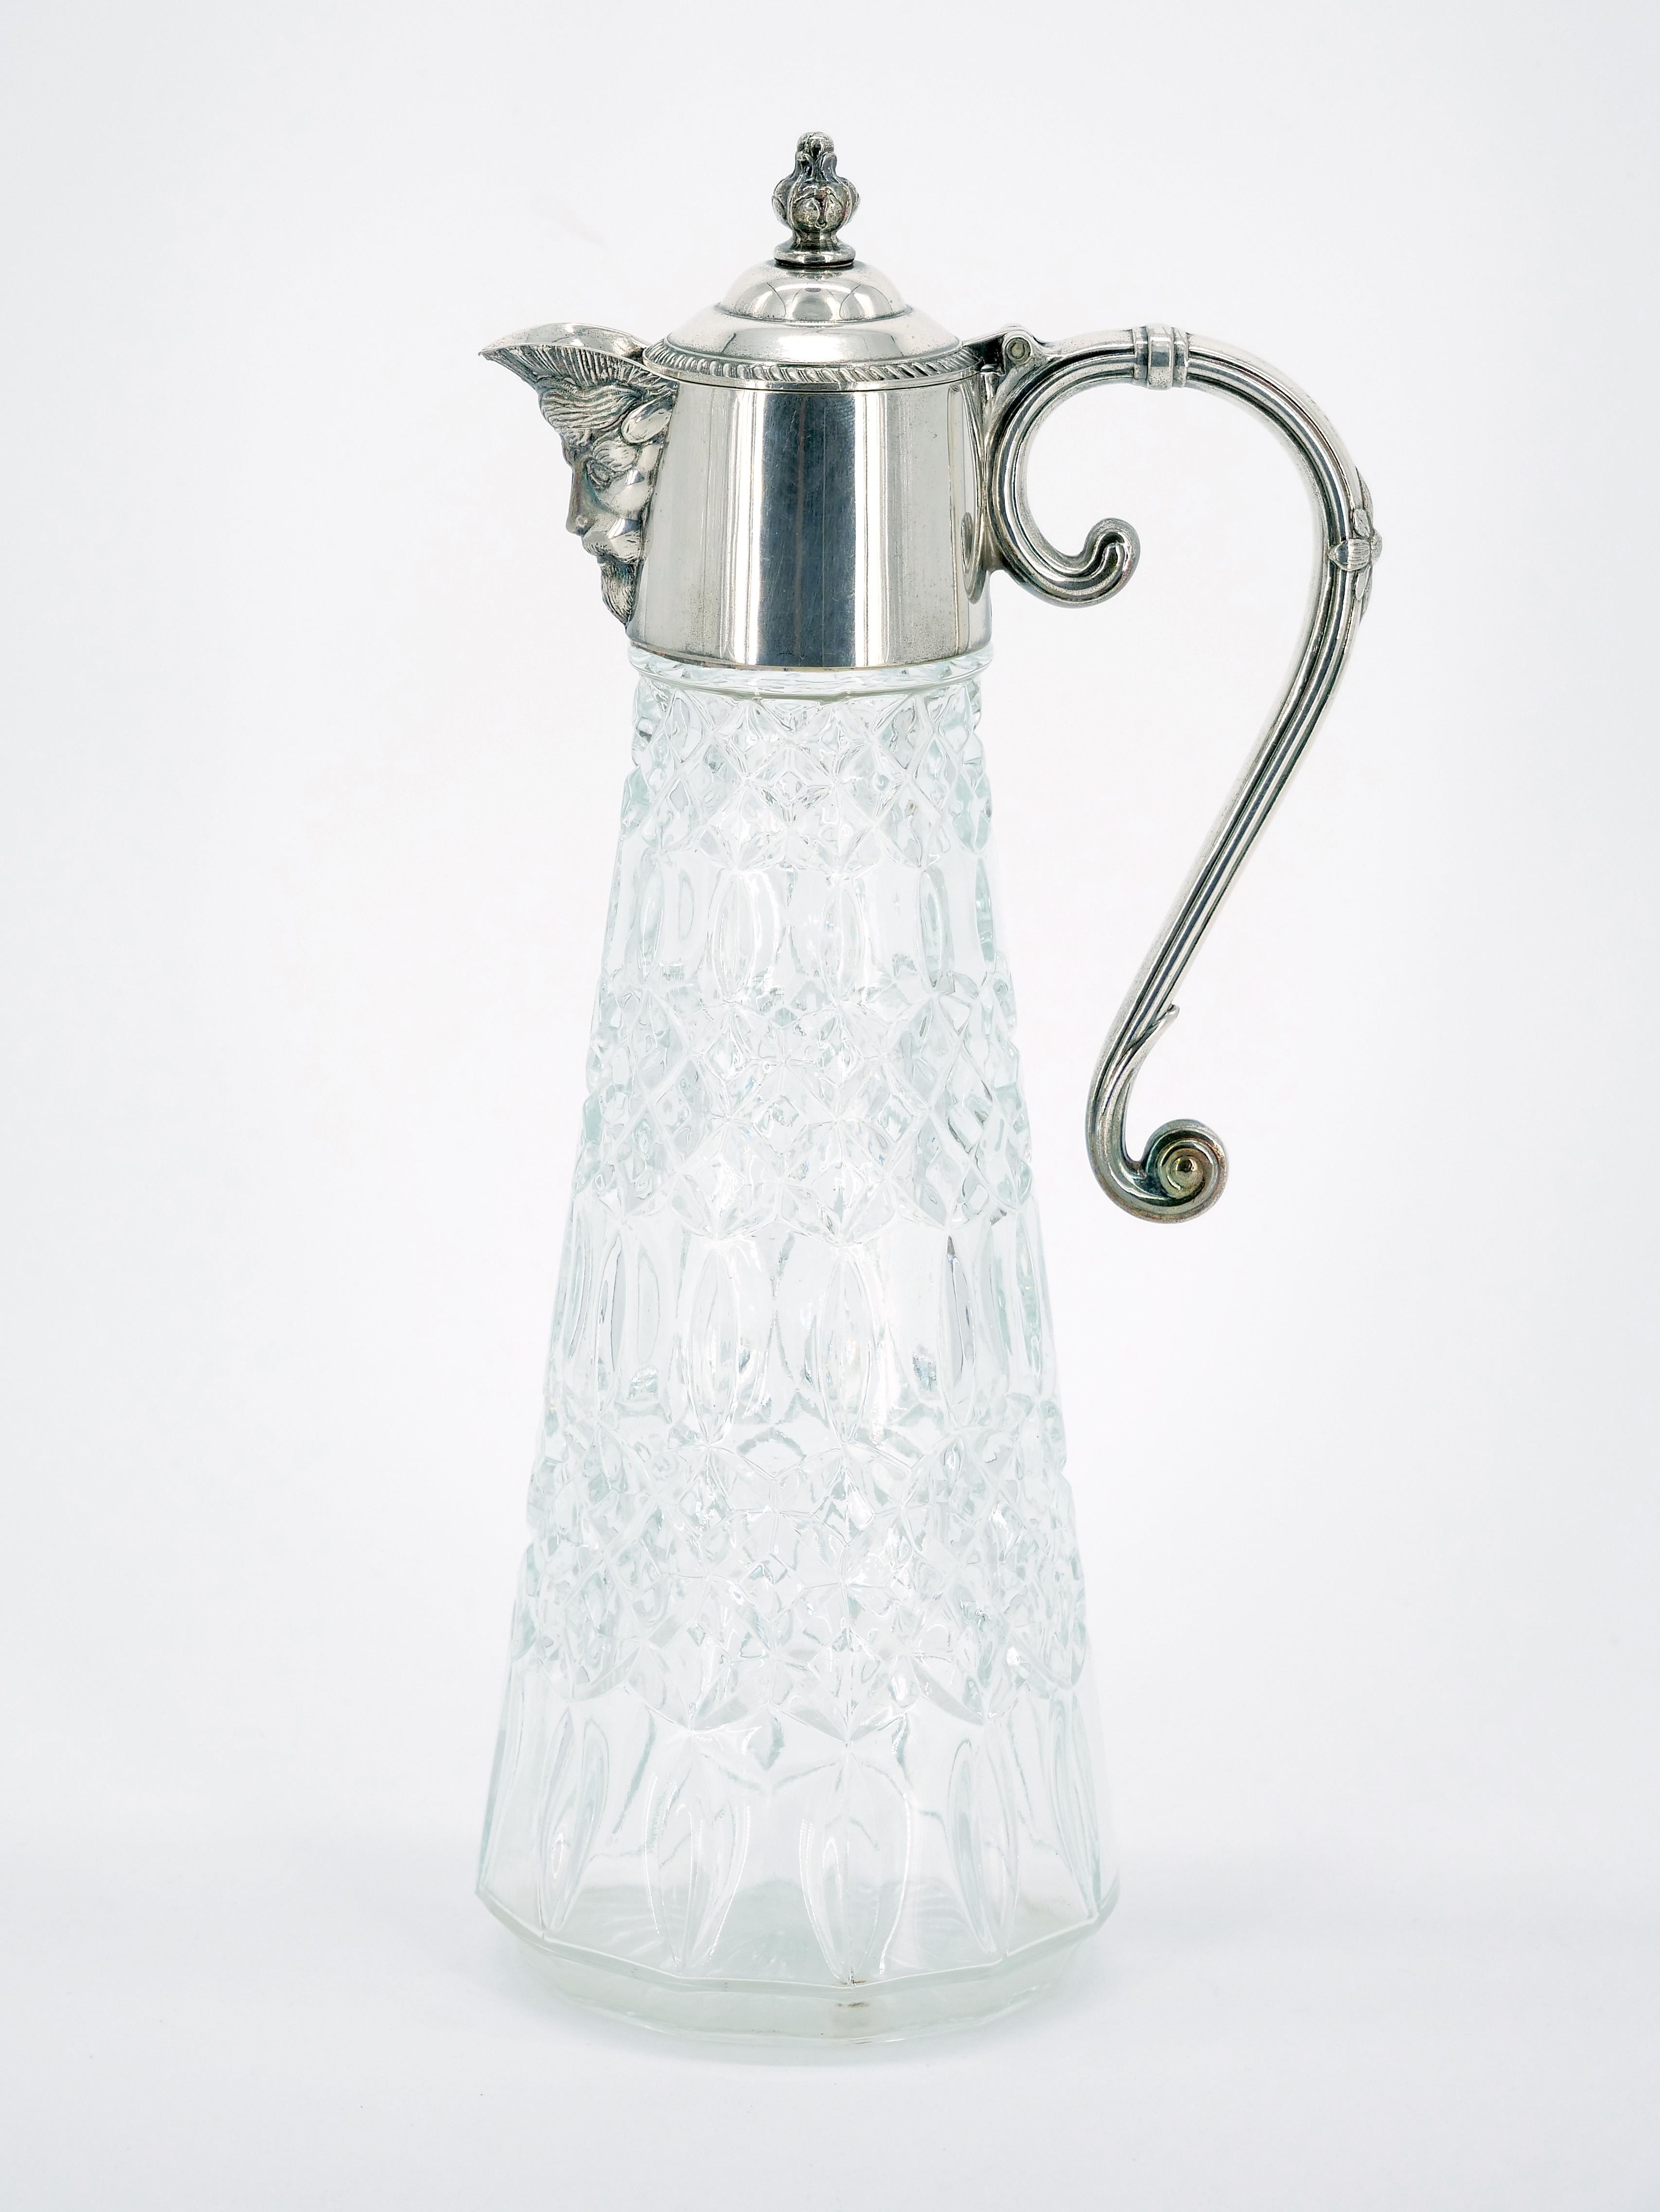 19th Century Silver Plate Holding Top / Cut Glass Claret Jug / Serving Pitcher For Sale 6